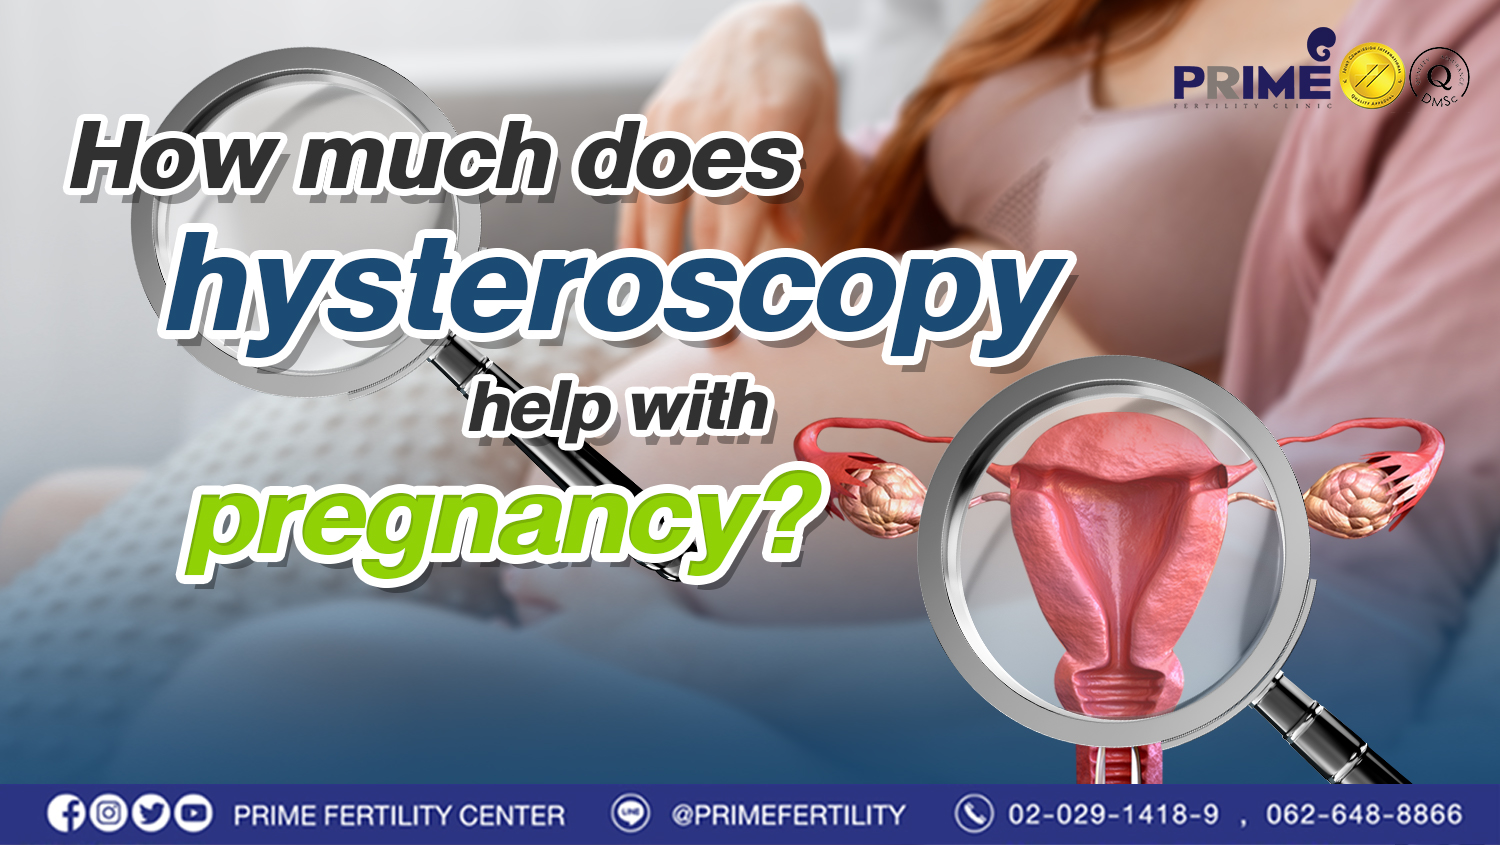 How much does hysteroscopy help with pregnancy?